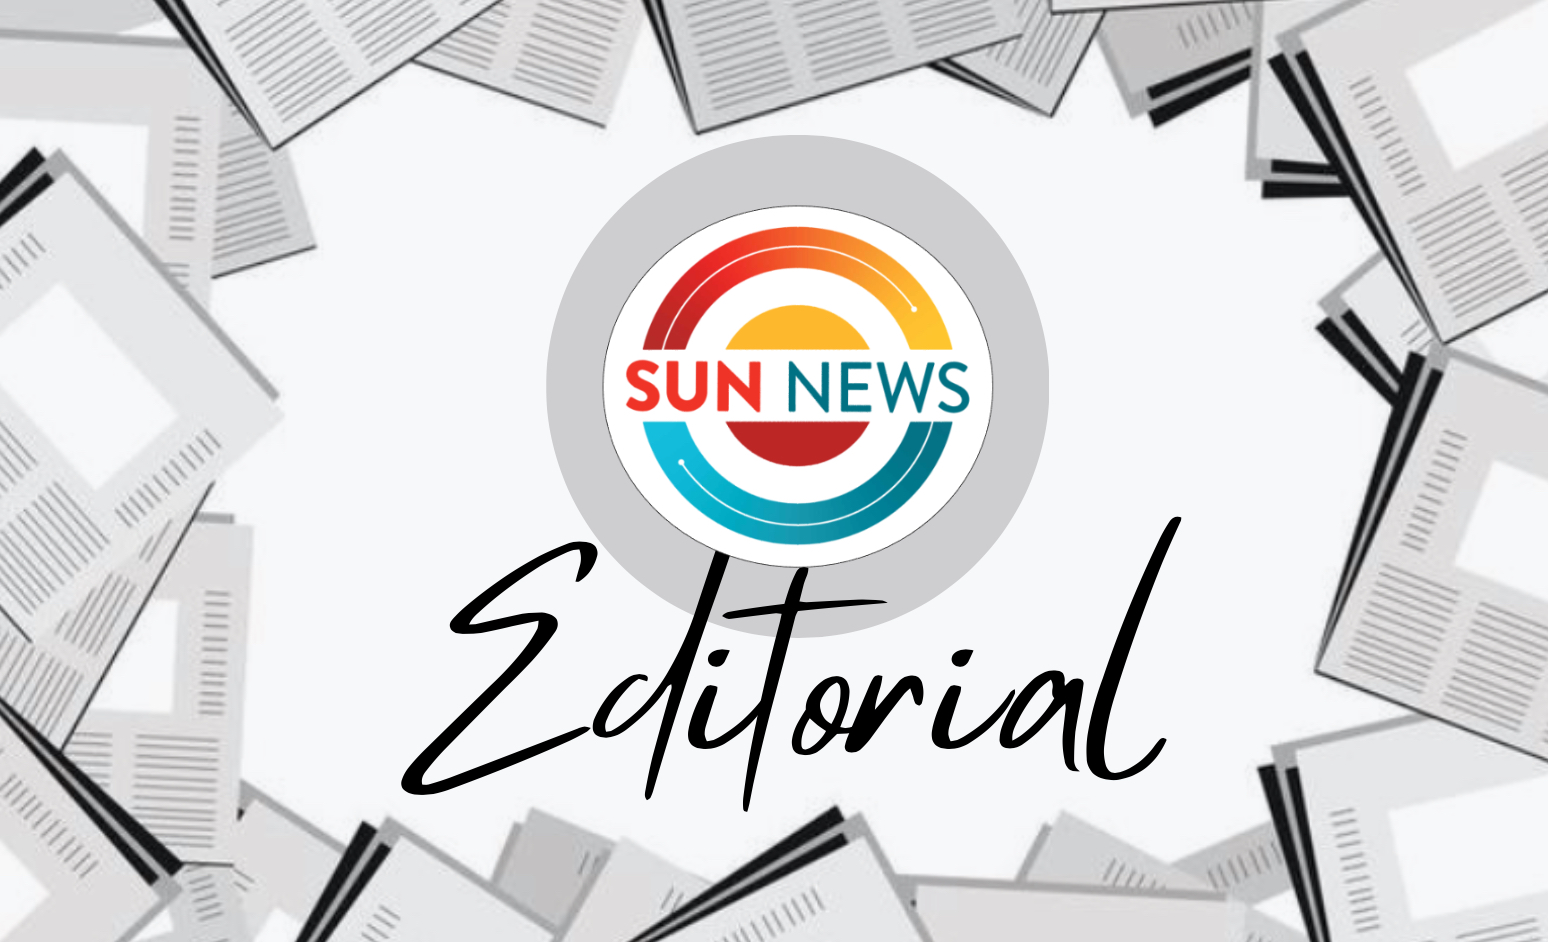 EDITORIAL | Keeping student journalism alive starts with Sun News